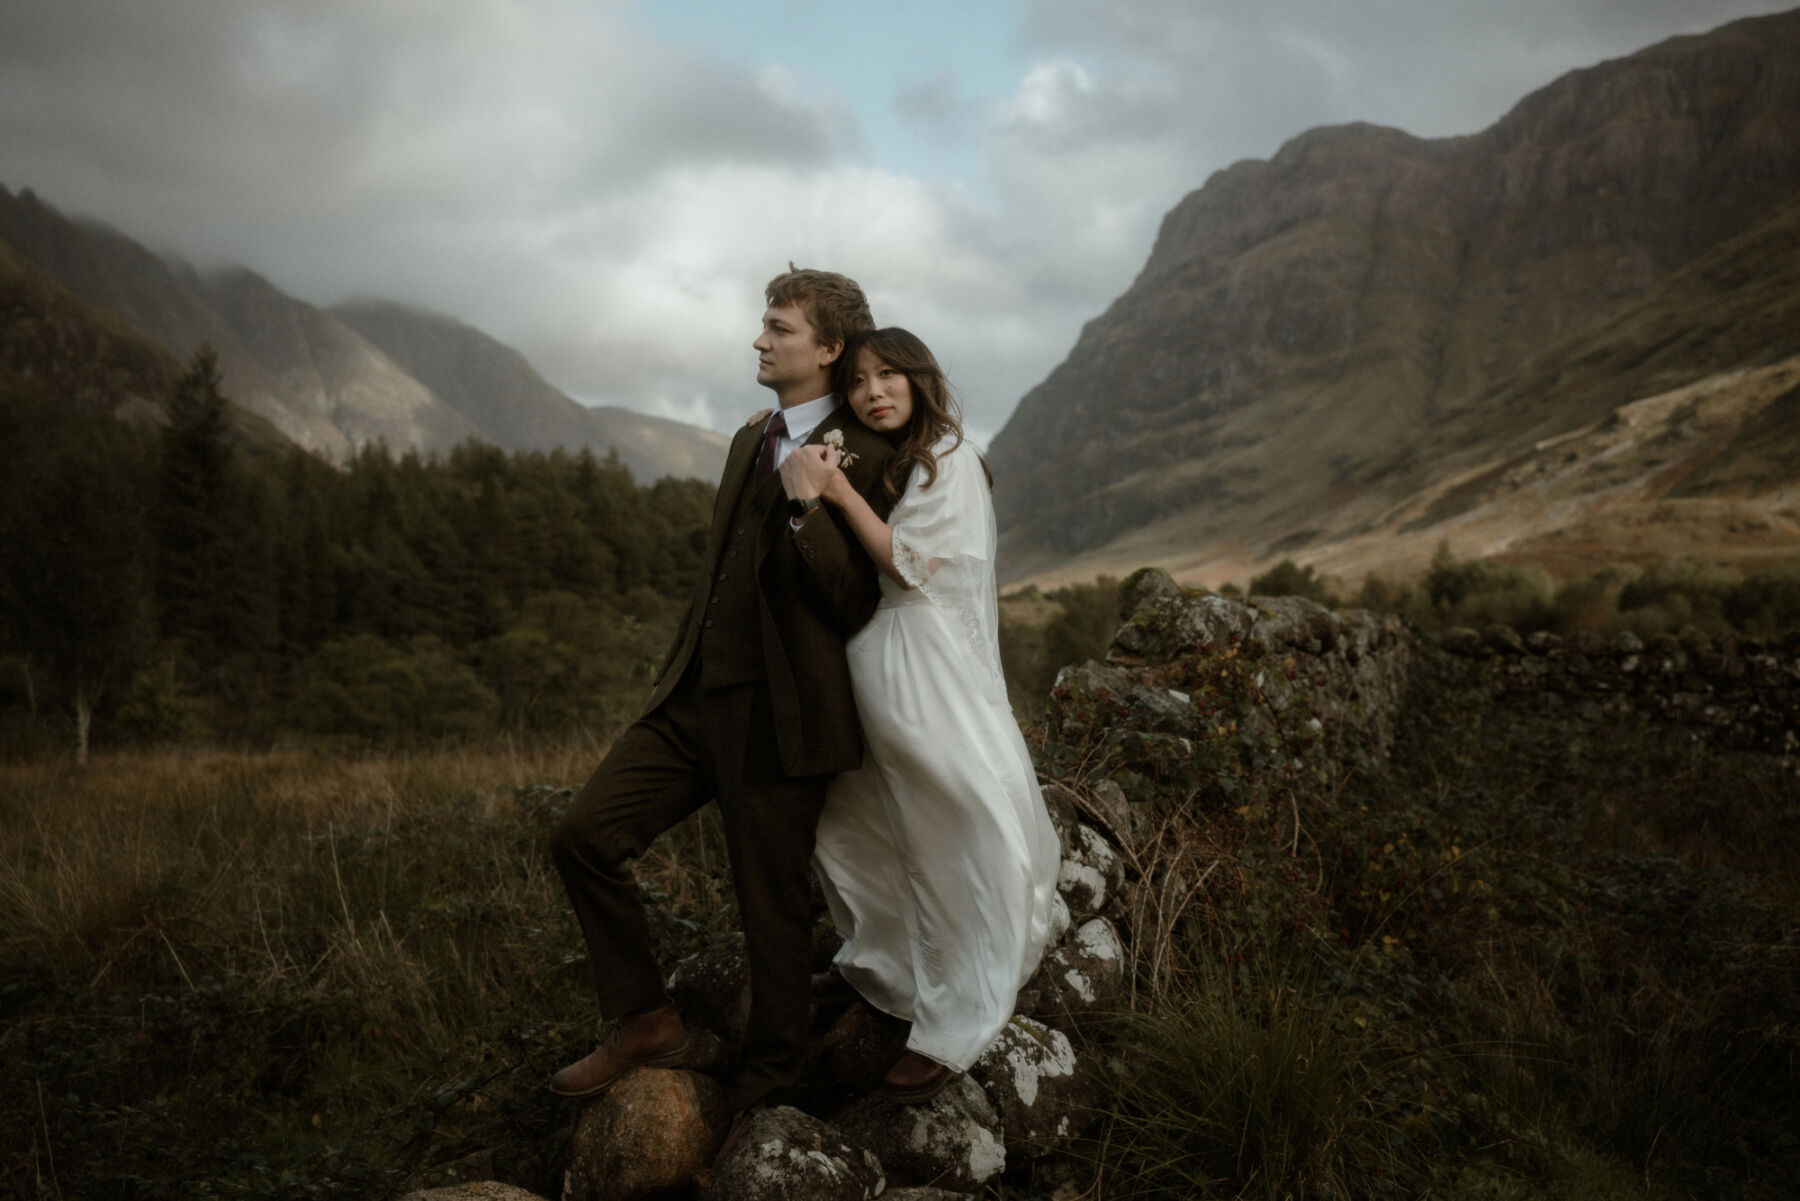 Atmospheric outdoor wedding photography by The Kitcheners, Scotland